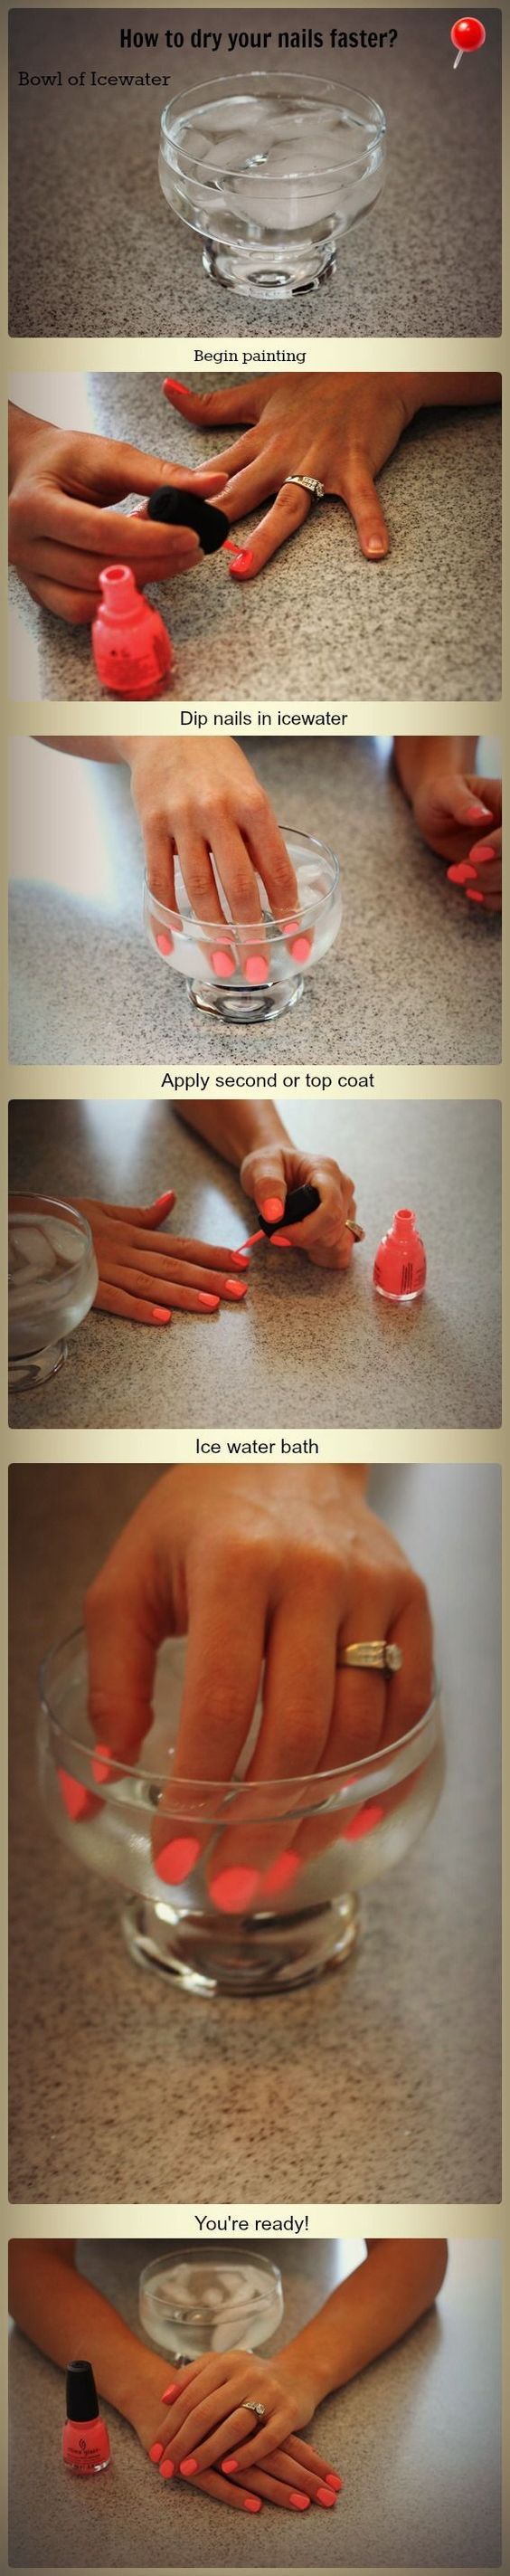 Check these 5 easy steps to learn how to dry your nails fast and easy! See how now